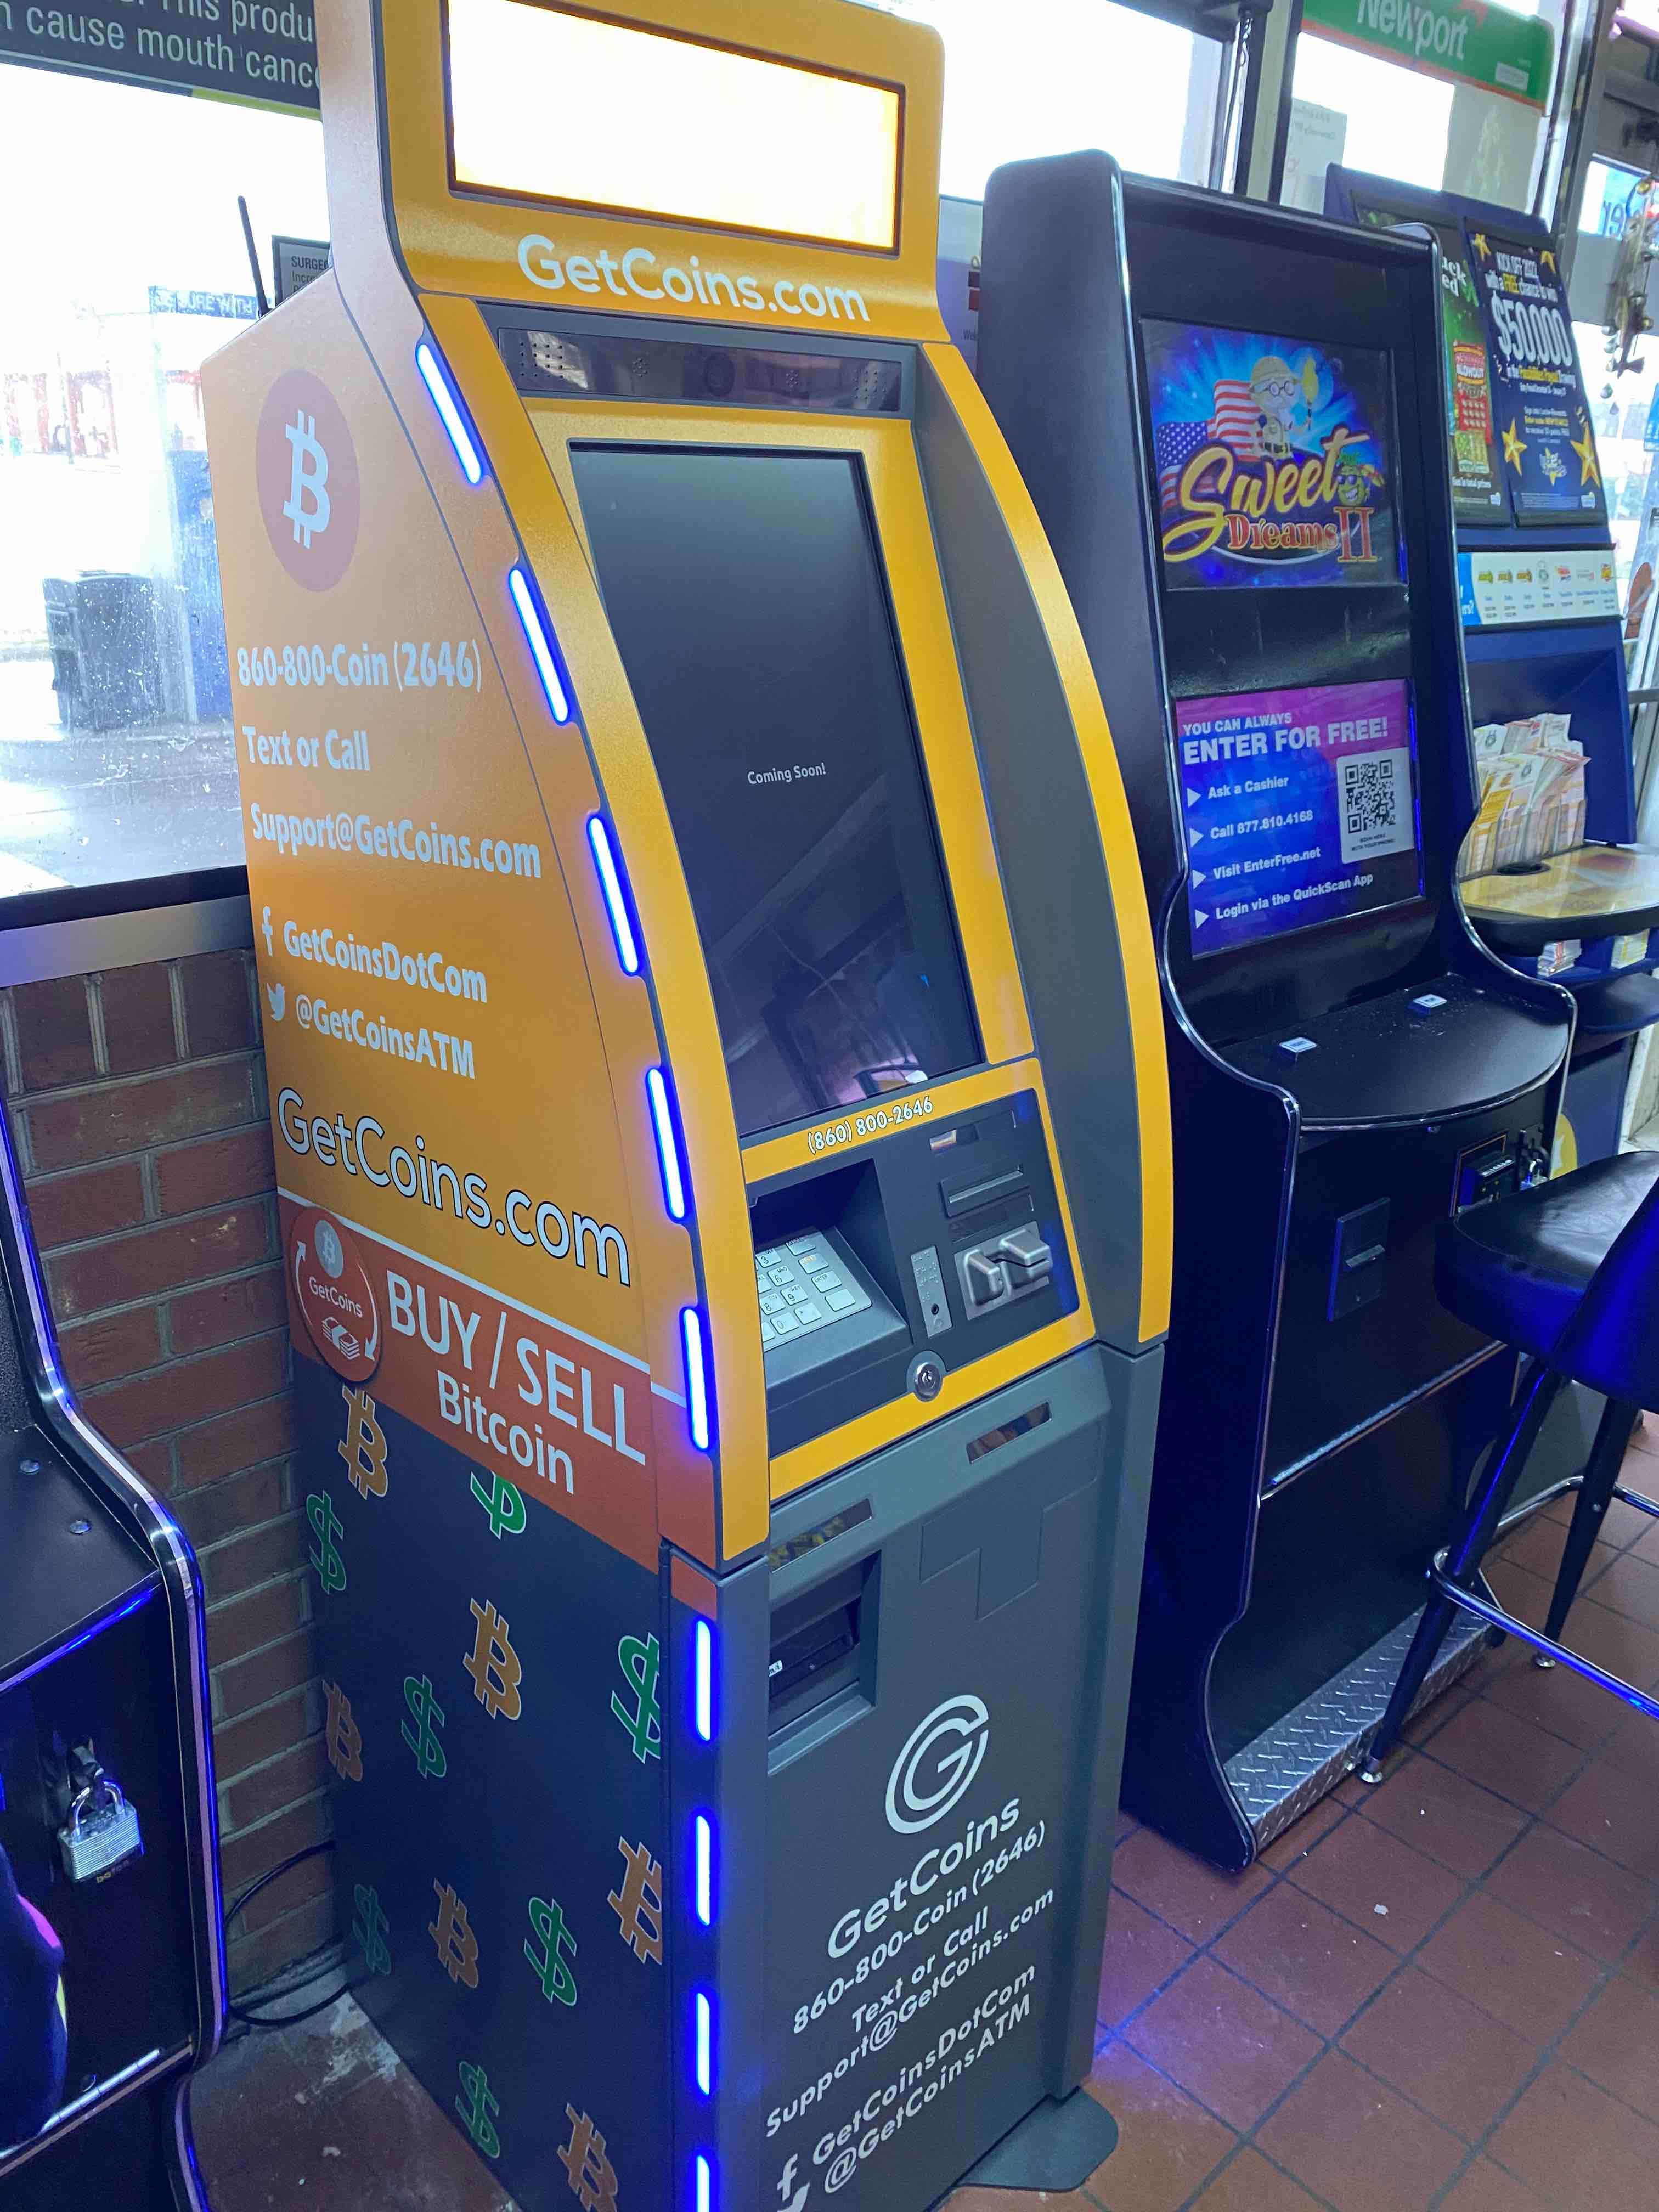 Getcoins - Bitcoin ATM - Inside of Short Stop Food Mart in Fayetteville, North Carolina